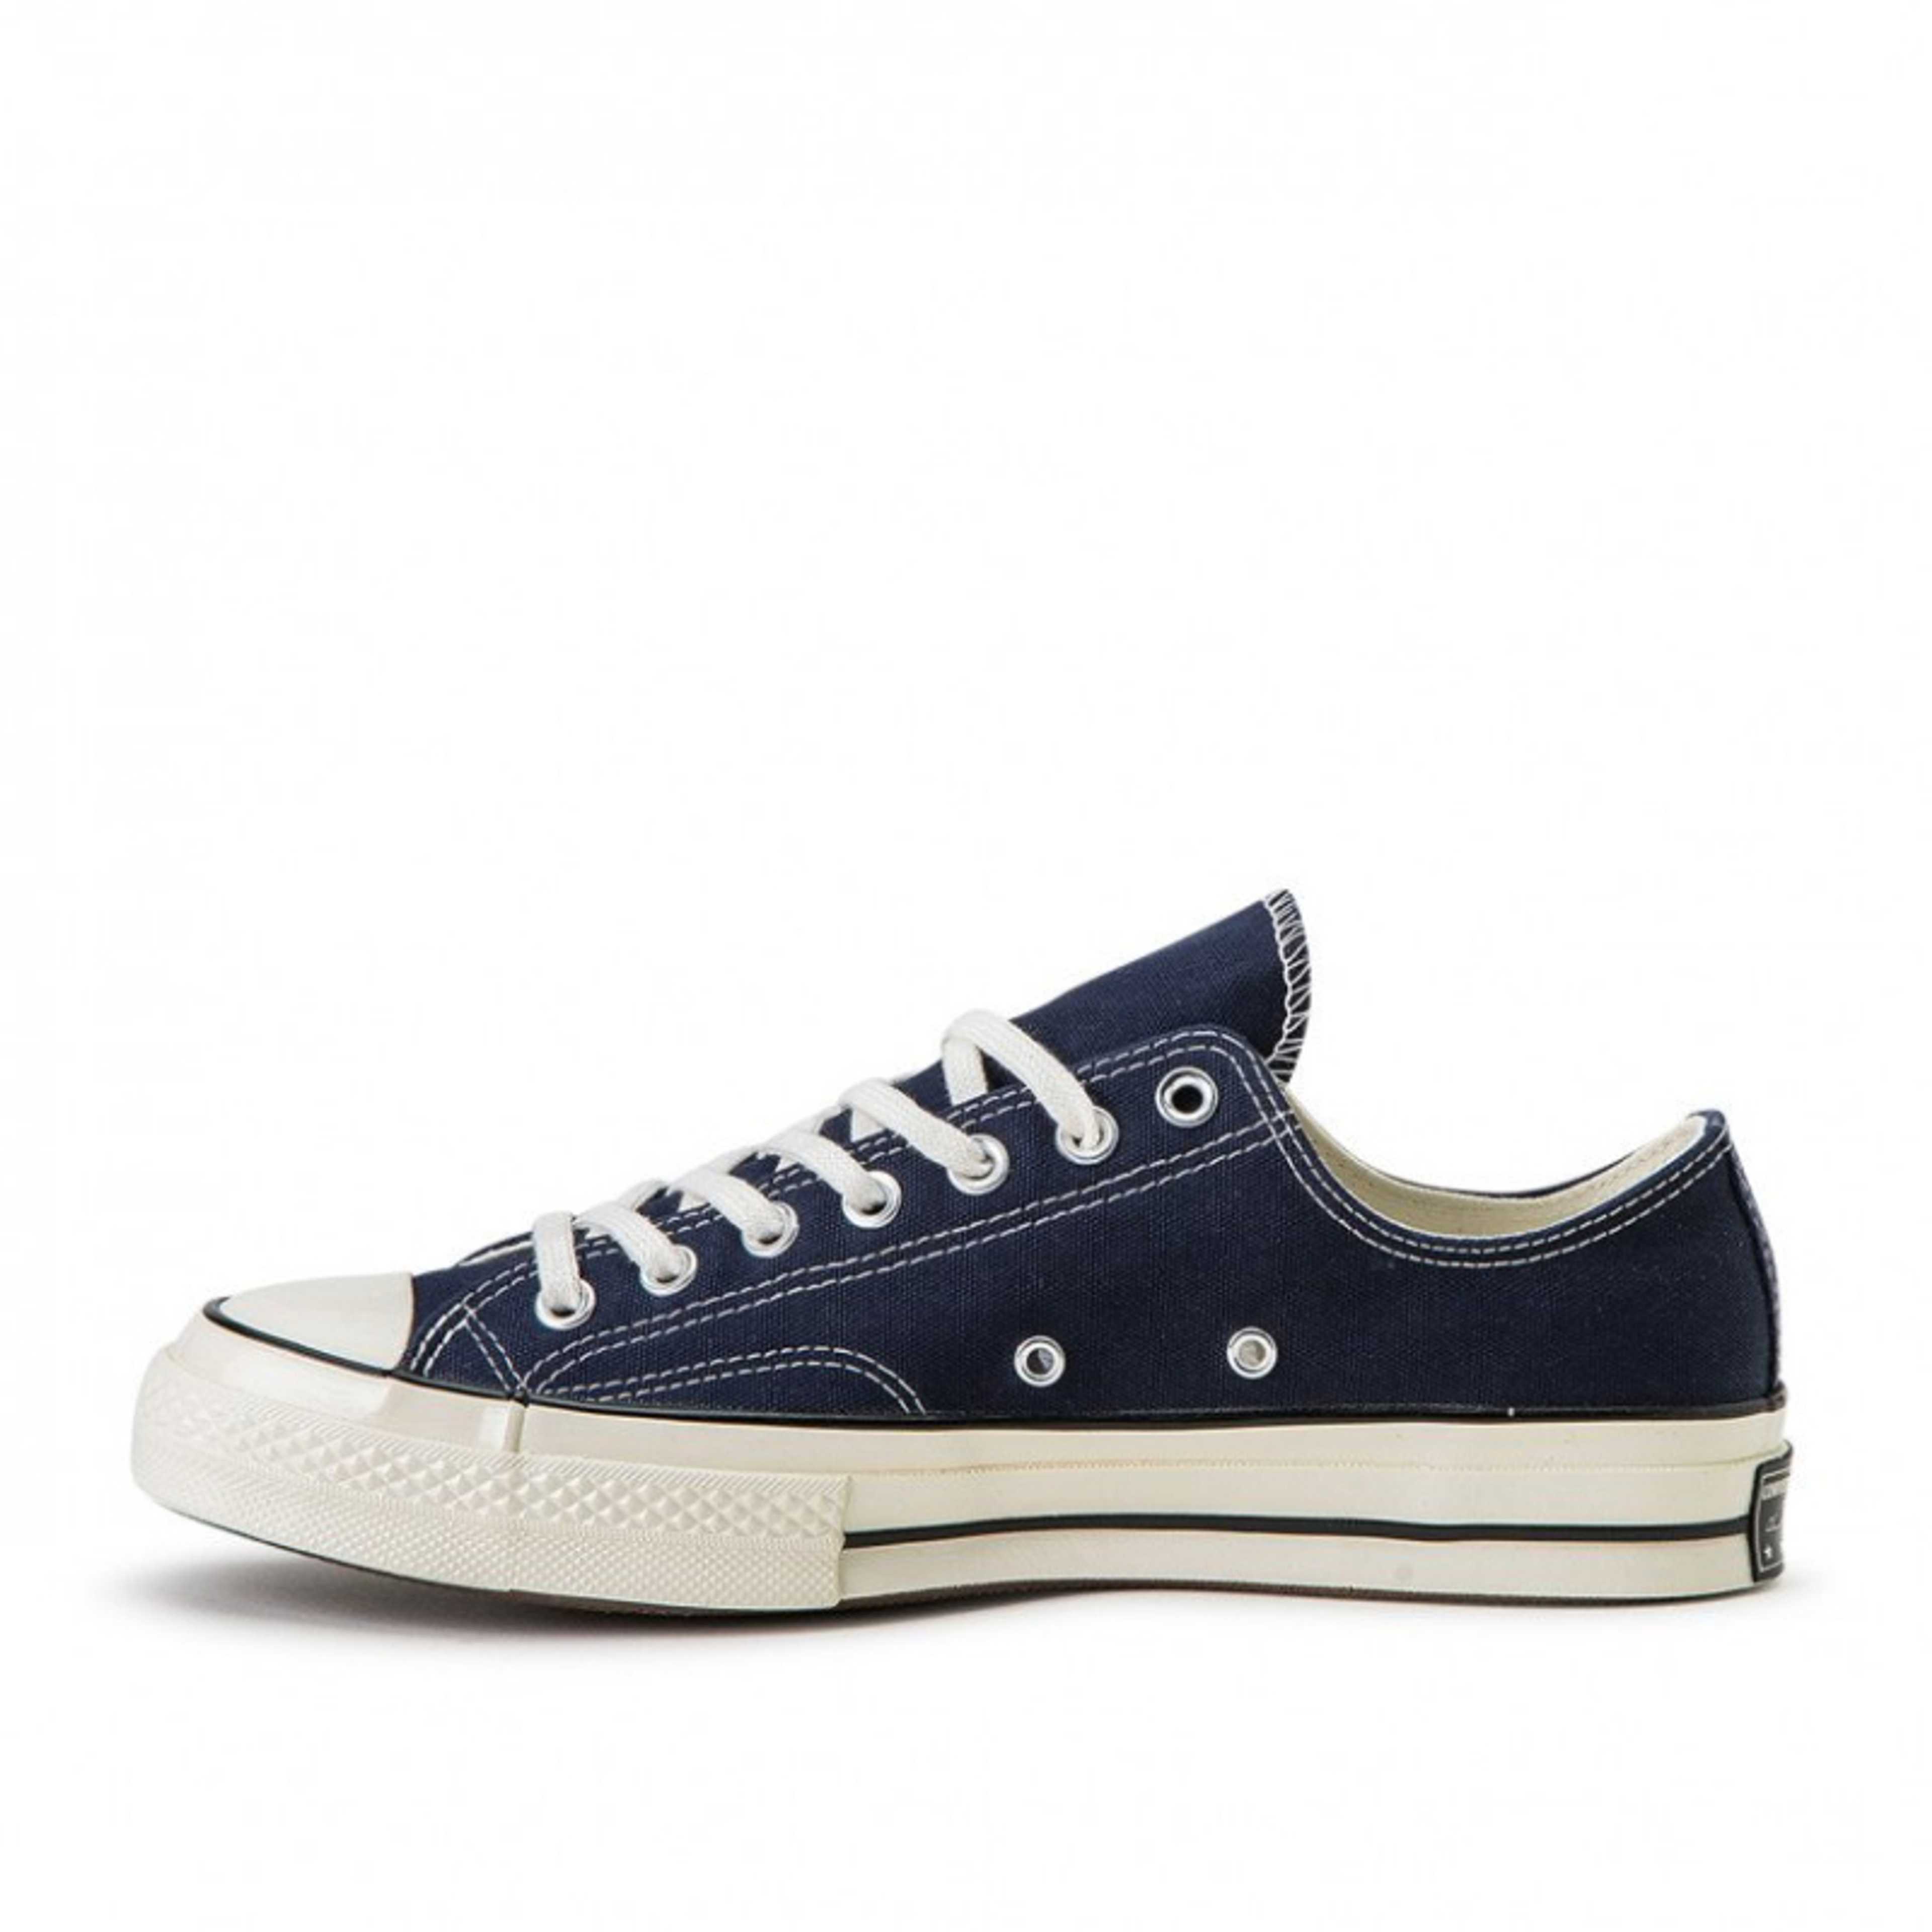 New Chuck 70 low-top sneakers-a18